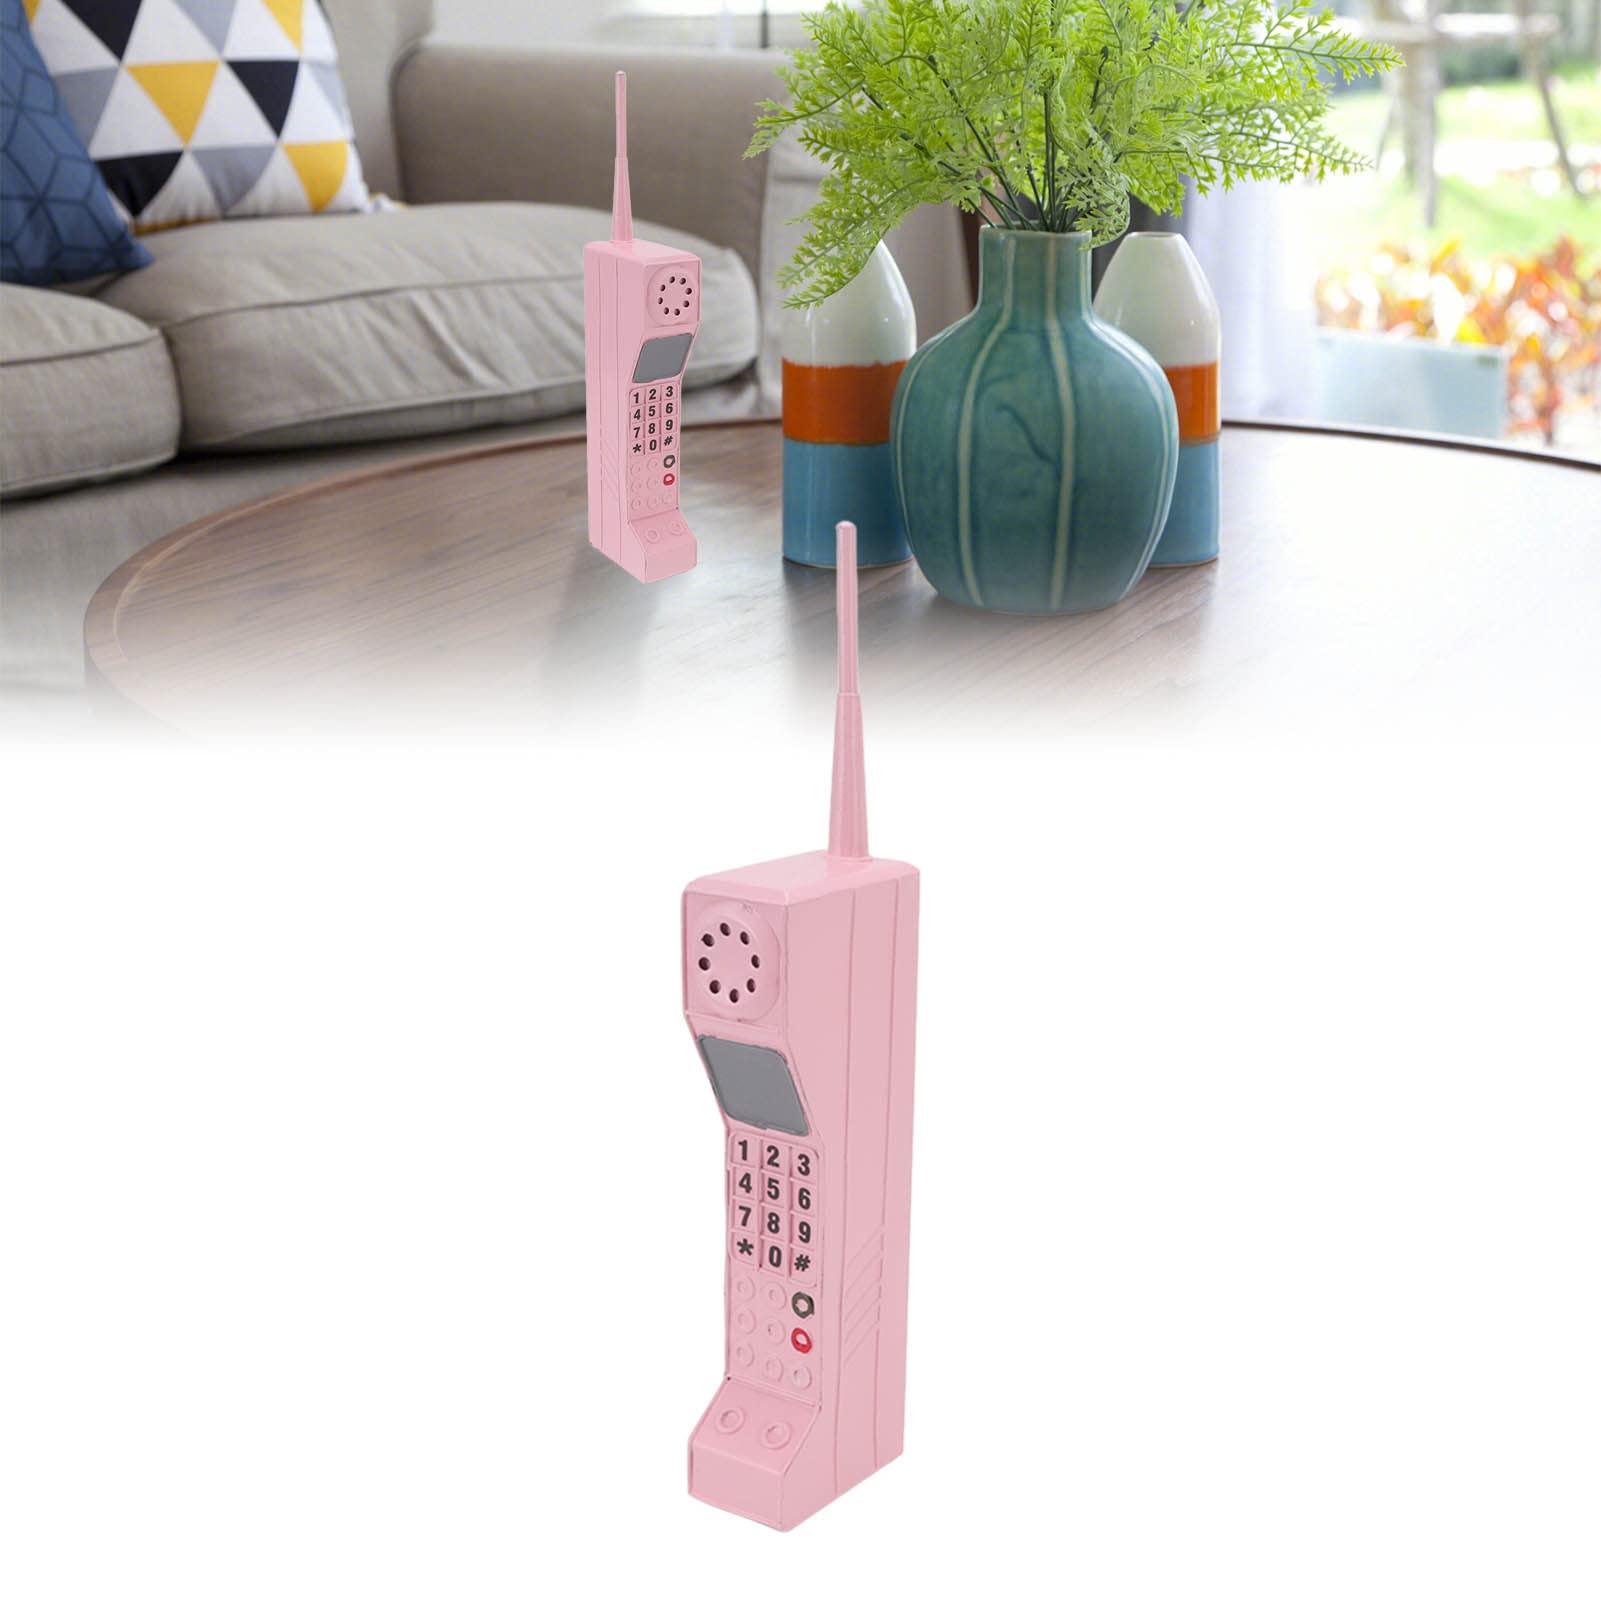 Inflatable Mobile Phone,80's Retro Mobile Phone,Retro Brick Cell Phone Ornament,for 80's 90's Party Decorations Supplies Retro Cell Dress Accessory,Inflatable Mobile Phone (Pink)